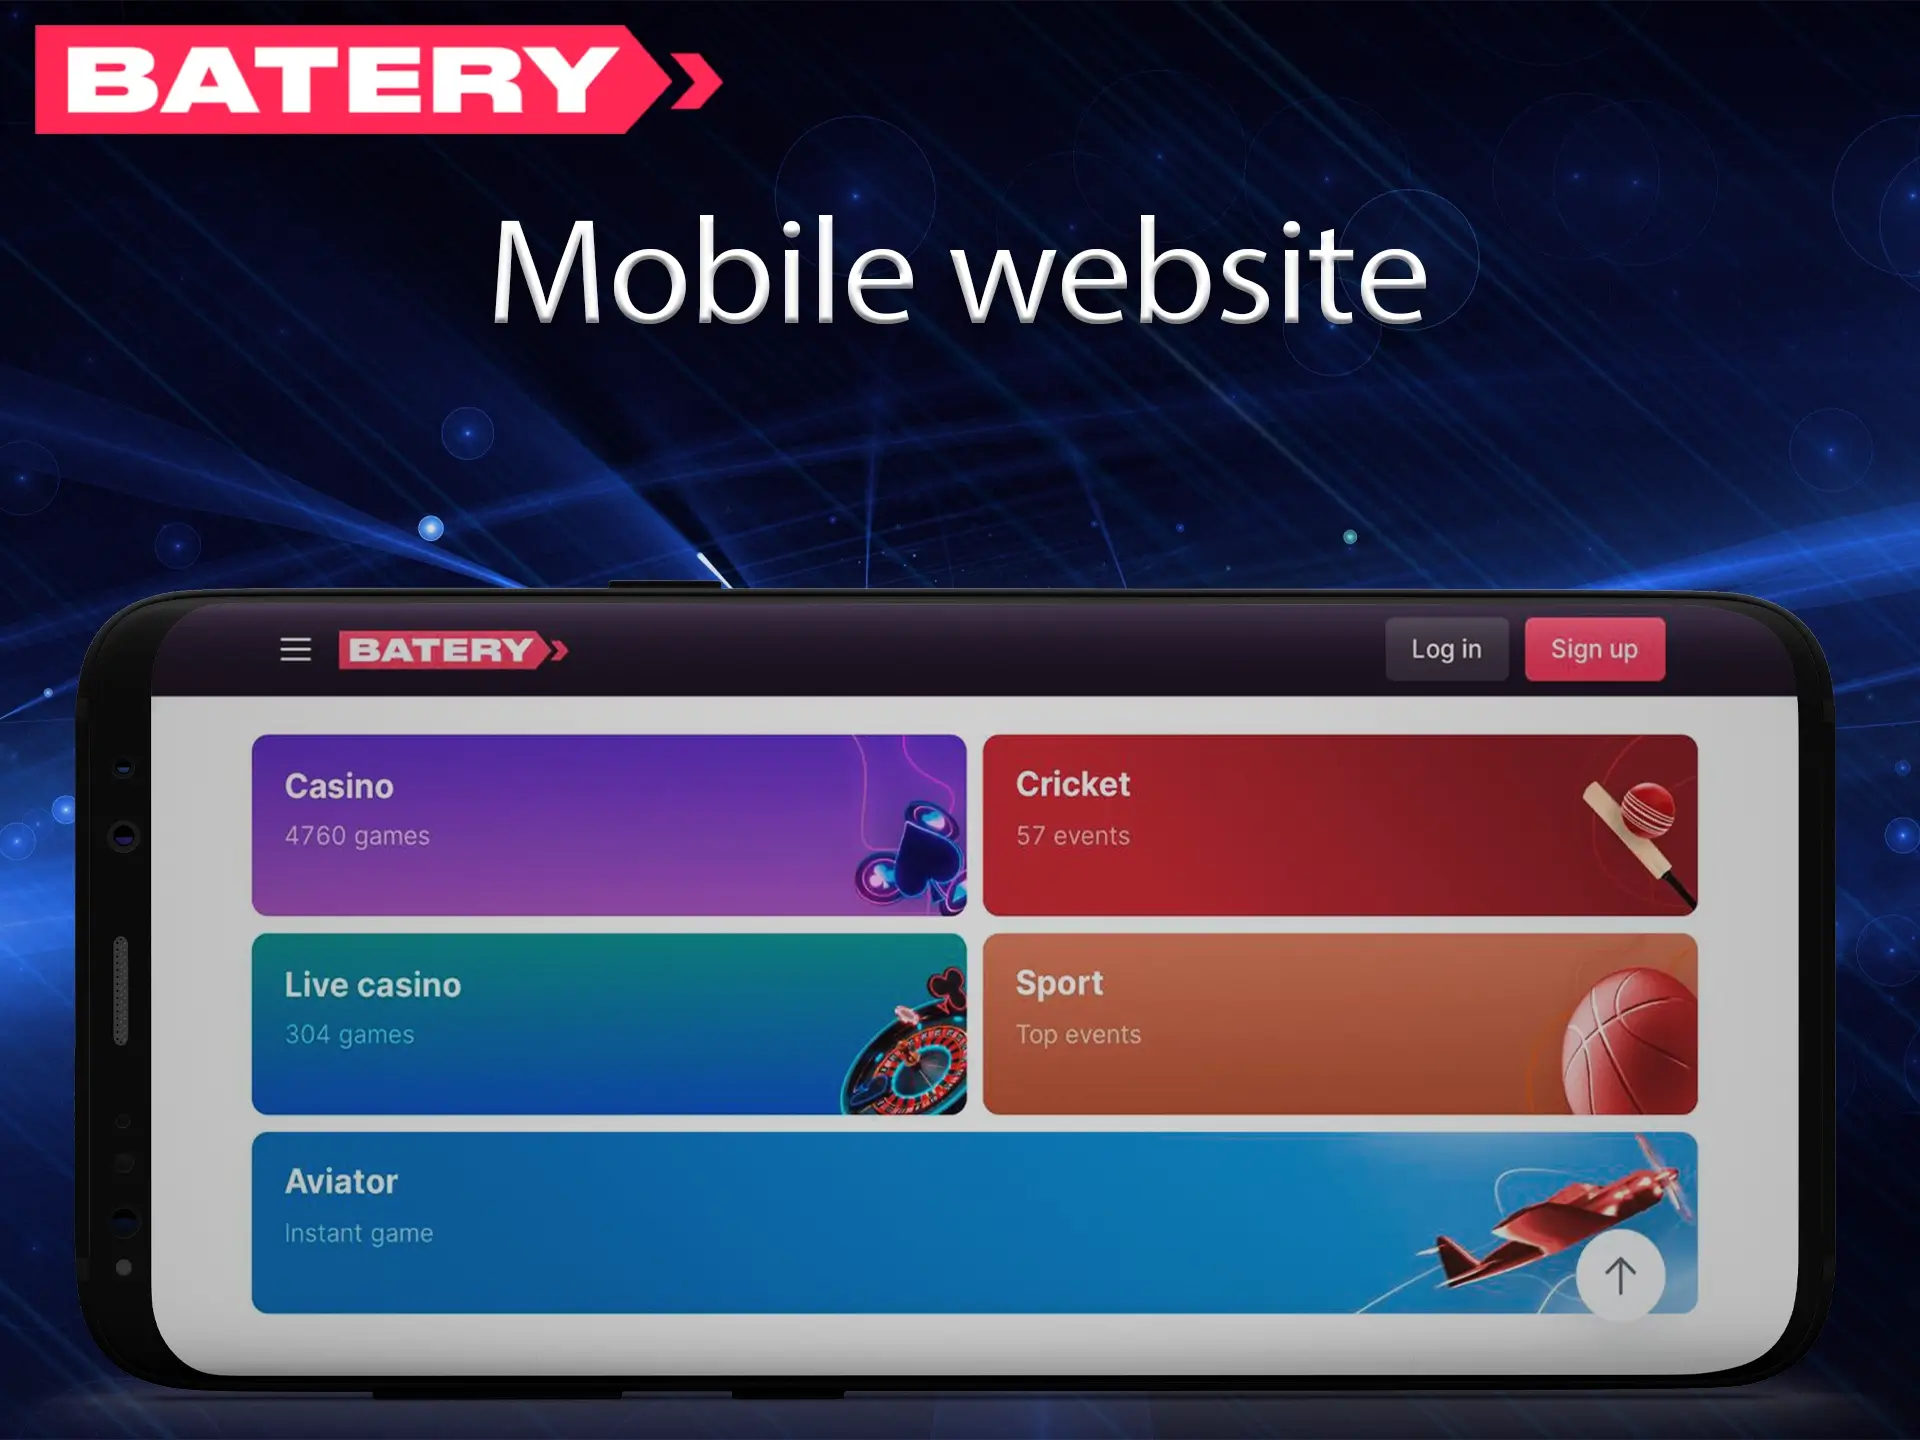 The mobile version of the Batery website has a simple and straightforward interface and excellent performance on any device.